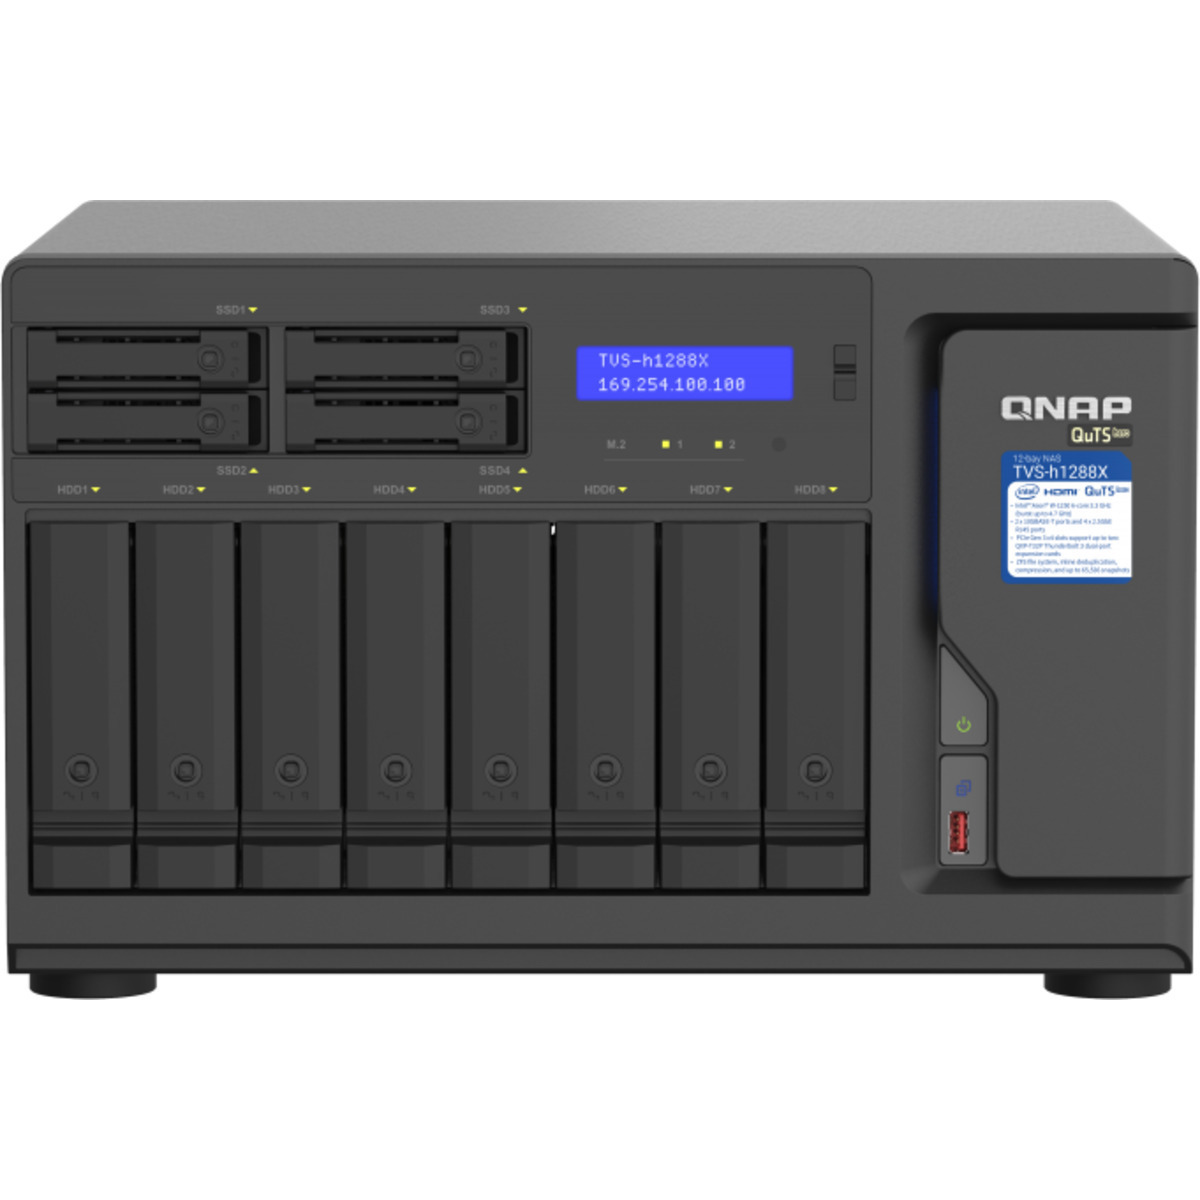 QNAP TVS-h1288X QuTS hero NAS 48tb 8+4-Bay Desktop Multimedia / Power User / Business NAS - Network Attached Storage Device 6x8tb Western Digital Red Plus WD80EFPX 3.5 7200rpm SATA 6Gb/s HDD NAS Class Drives Installed - Burn-In Tested TVS-h1288X QuTS hero NAS